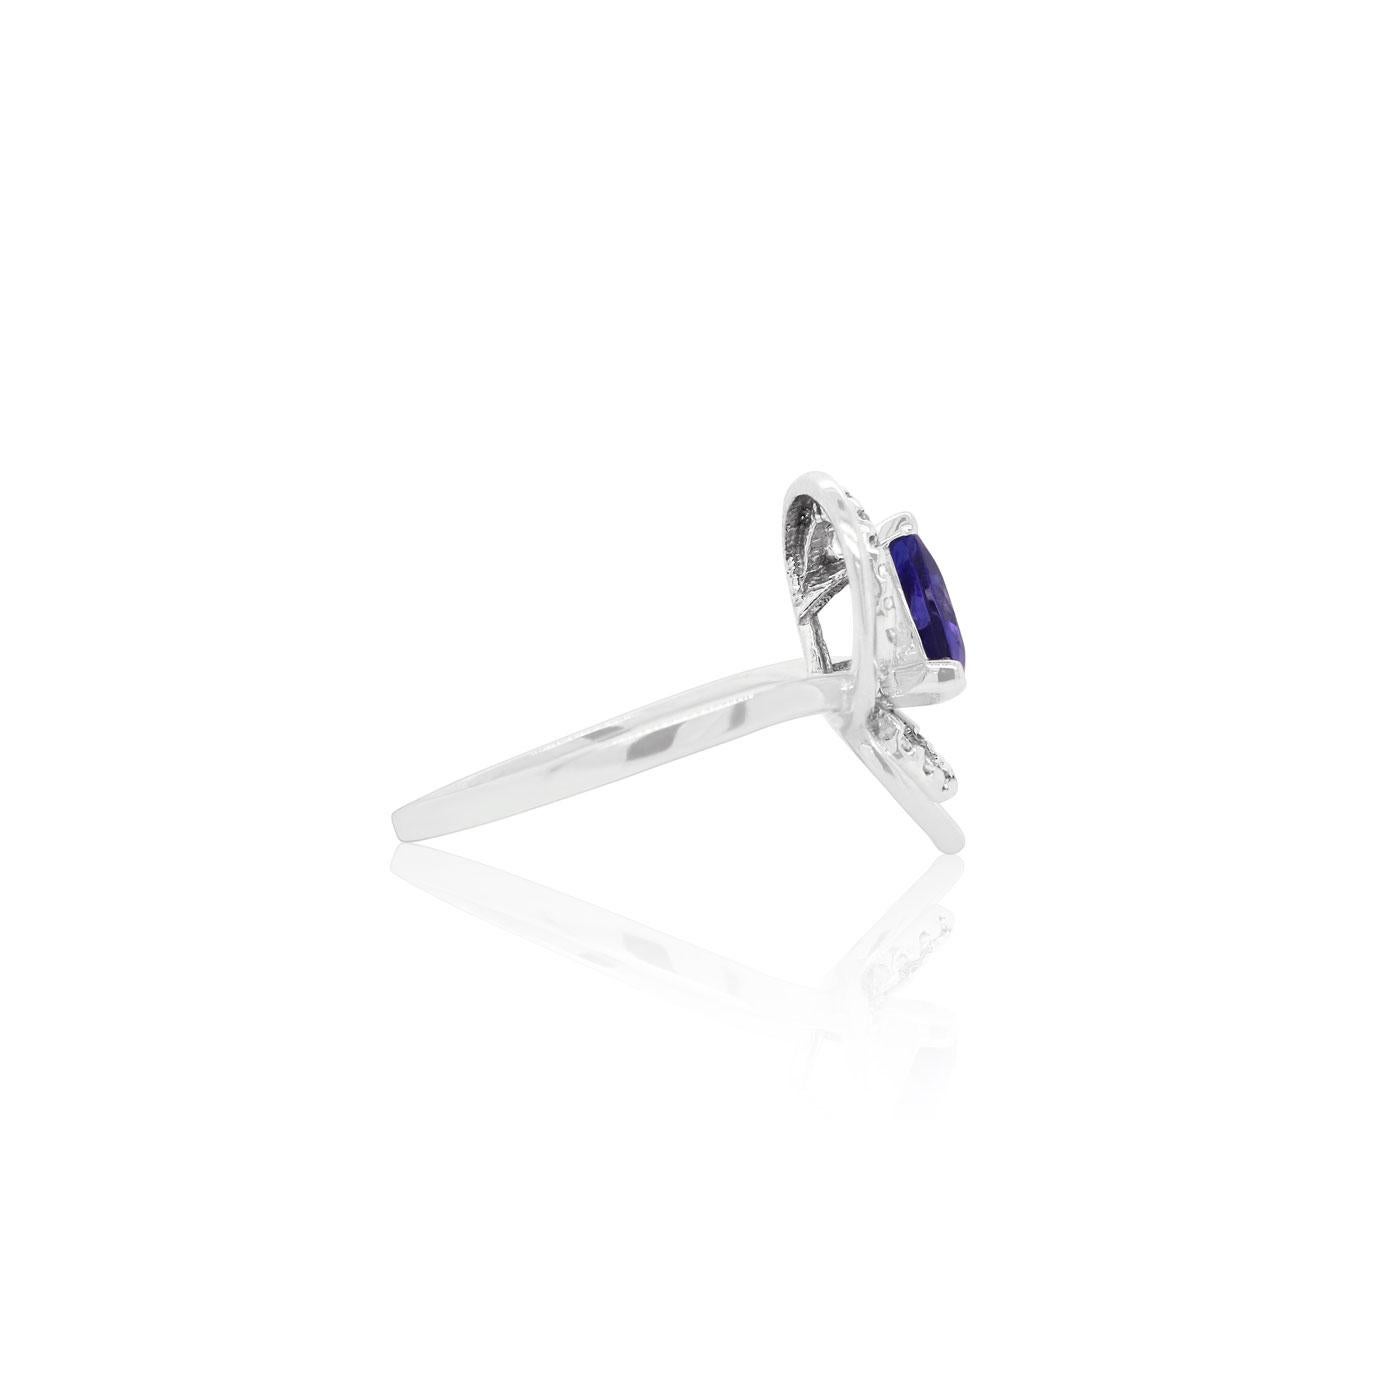 Material: 14K White Gold
Center Stone Details: 1 Trillion Tanzanite at 1.12 Carats - Measuring 7.5 millimeters
Side Stone Details: 24 Round Brilliant White Diamonds at 0.12 Carats Total Weight Color H-I / Clarity SI
Alberto offers complimentary